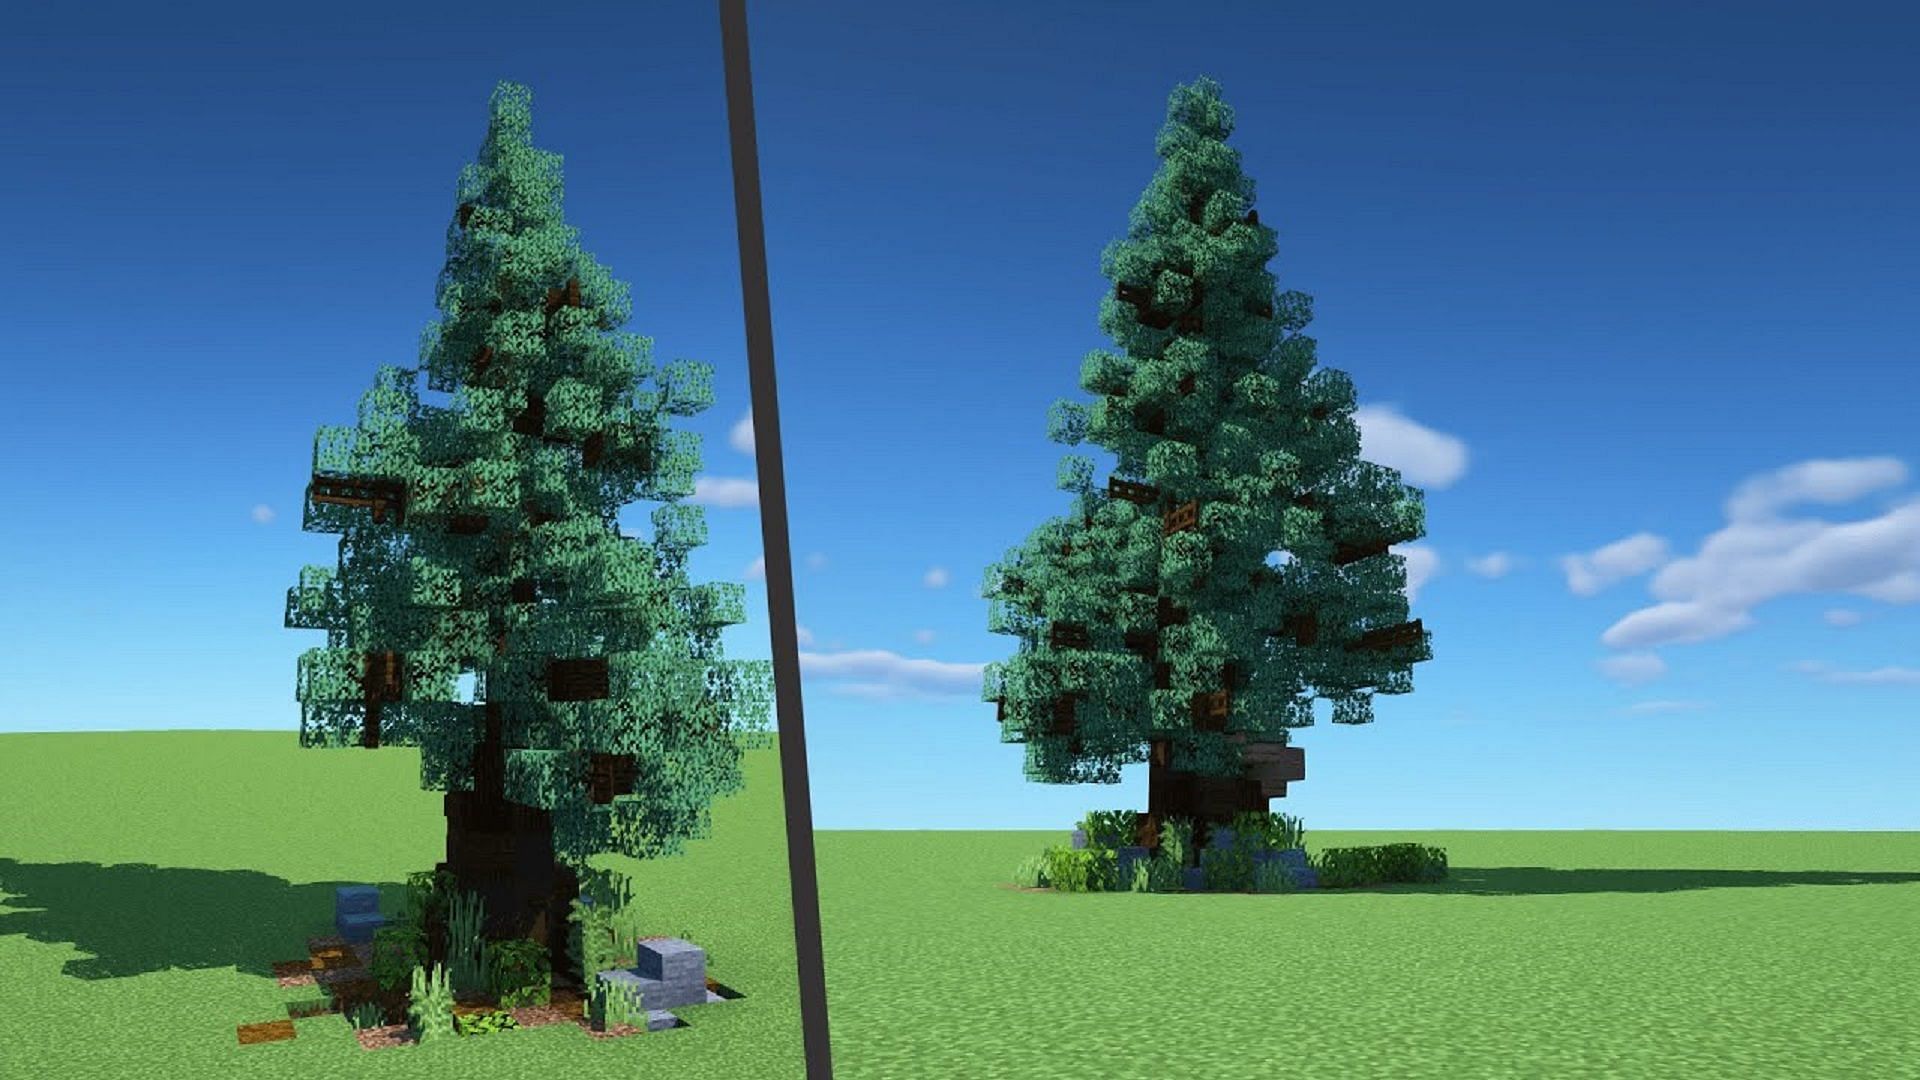 With some extra wood, leaves, and some fence posts, players can make a vastly improved spruce tree (Image via Osteost/YouTube)